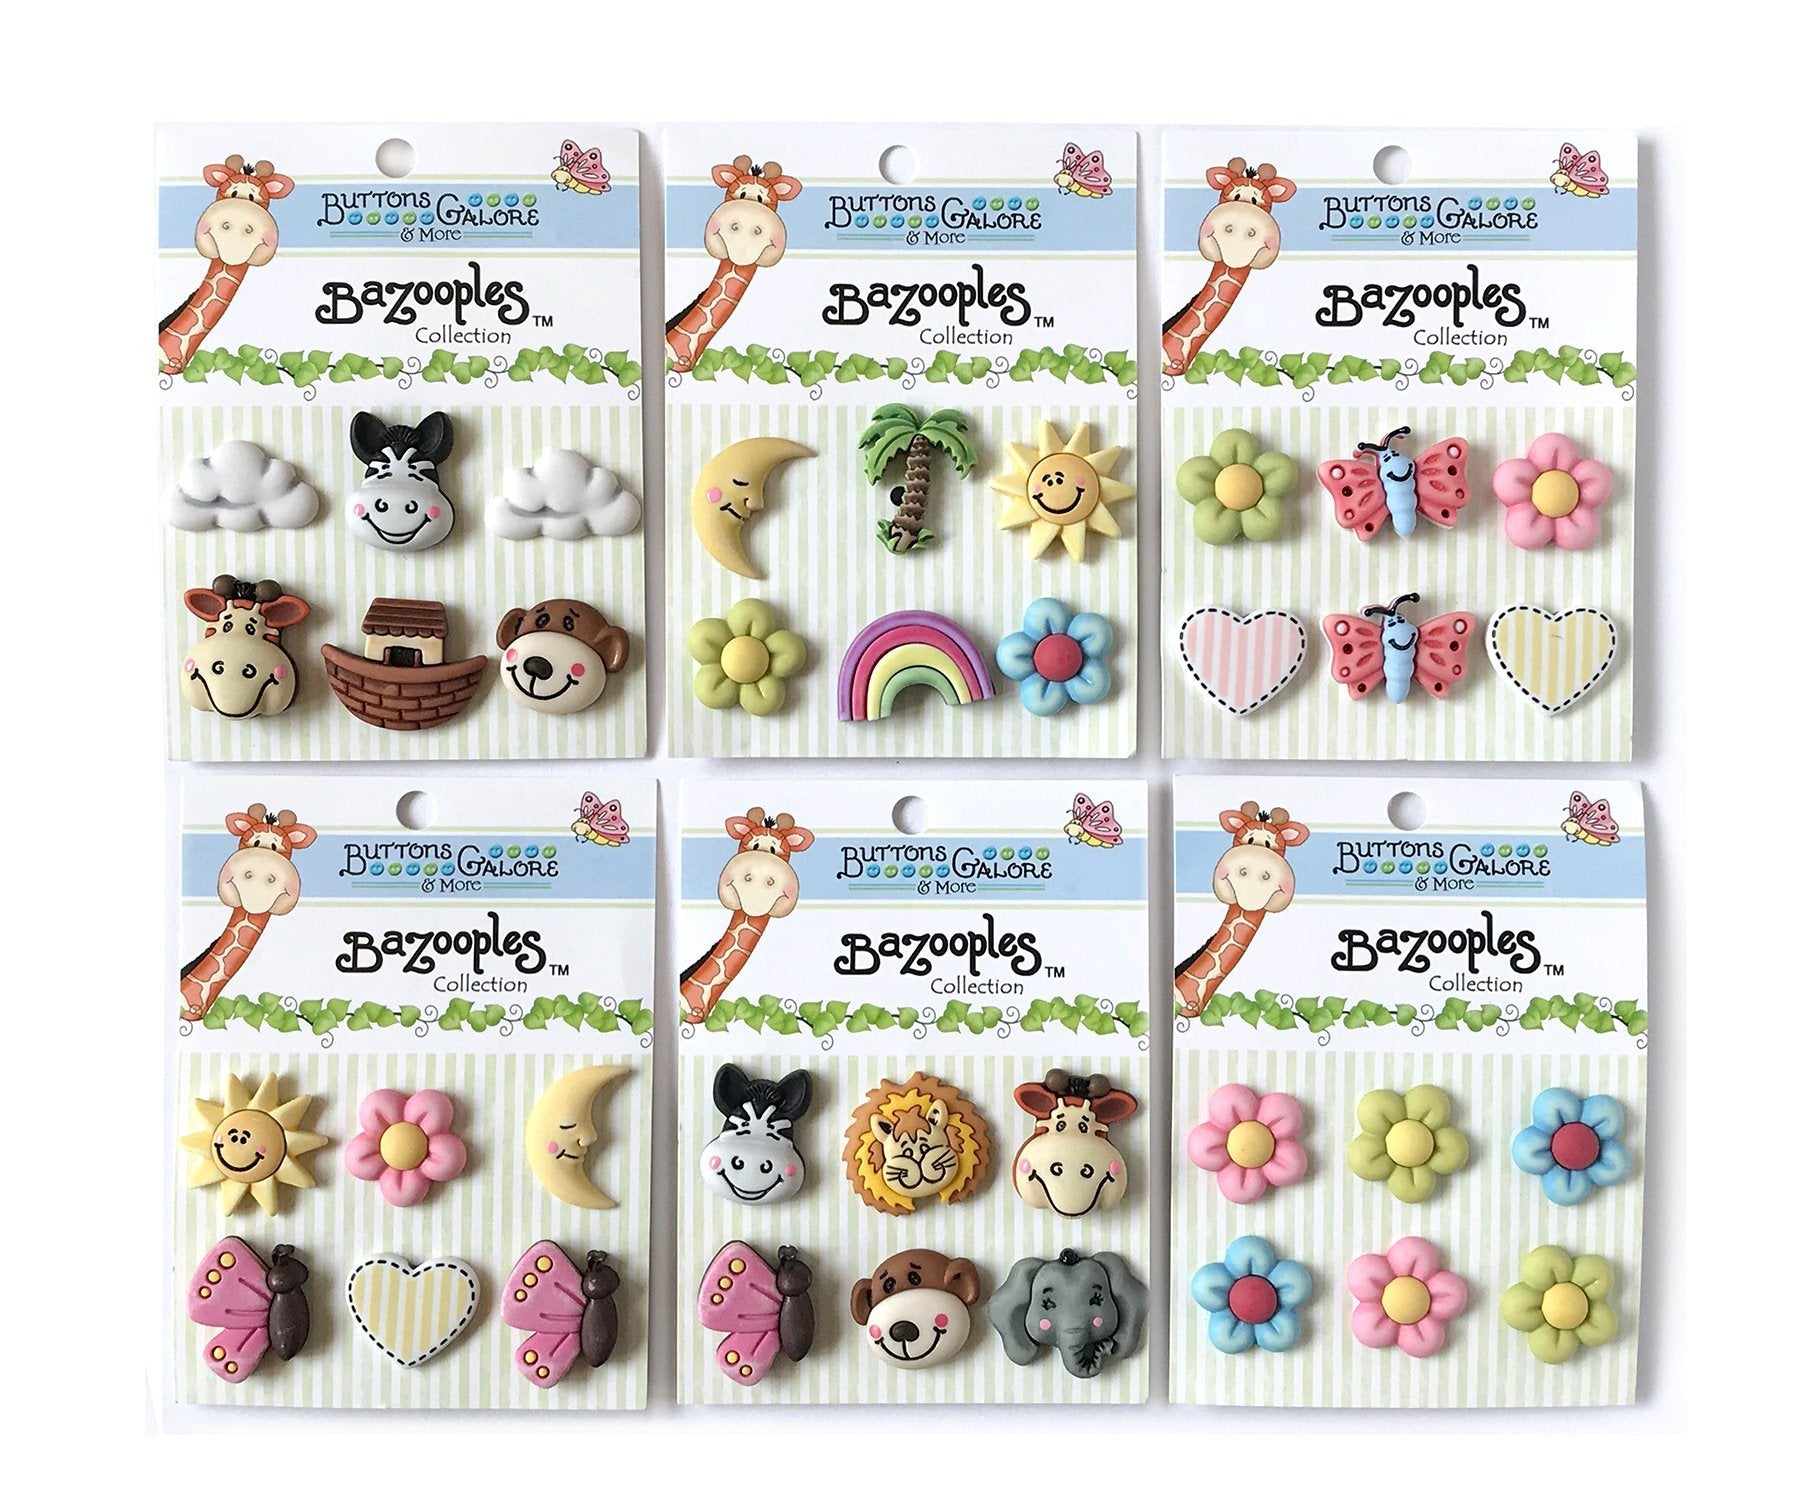 BaZooples Group - Buttons Galore and More